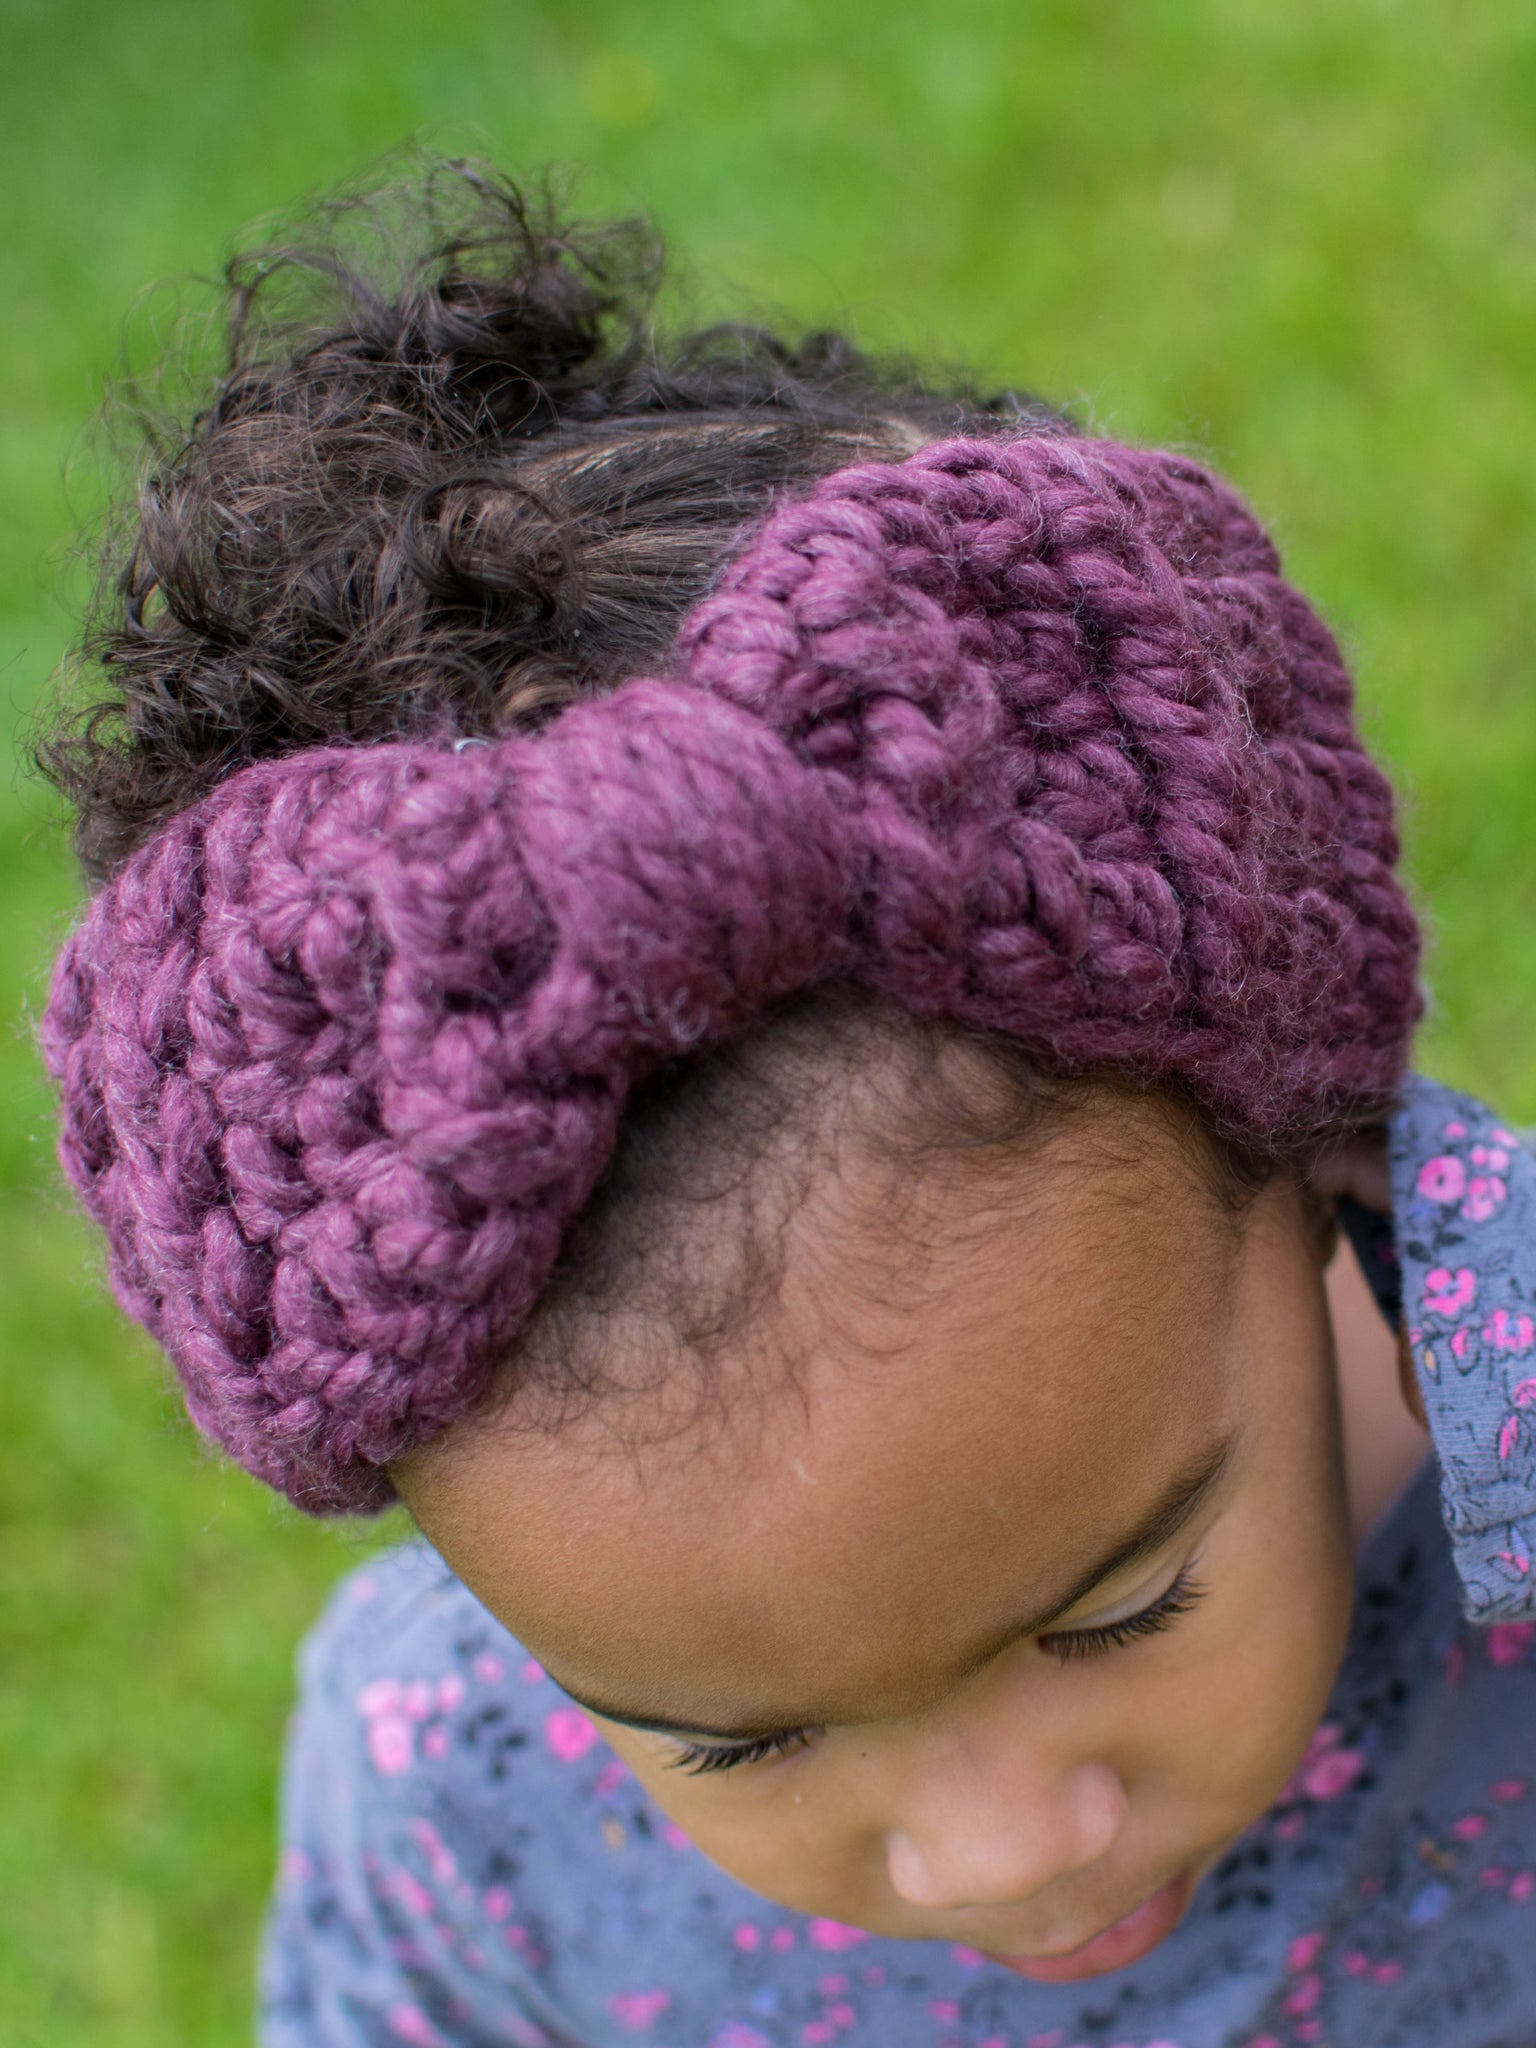 32 colors knotted bow winter headband by Two Seaside Babes